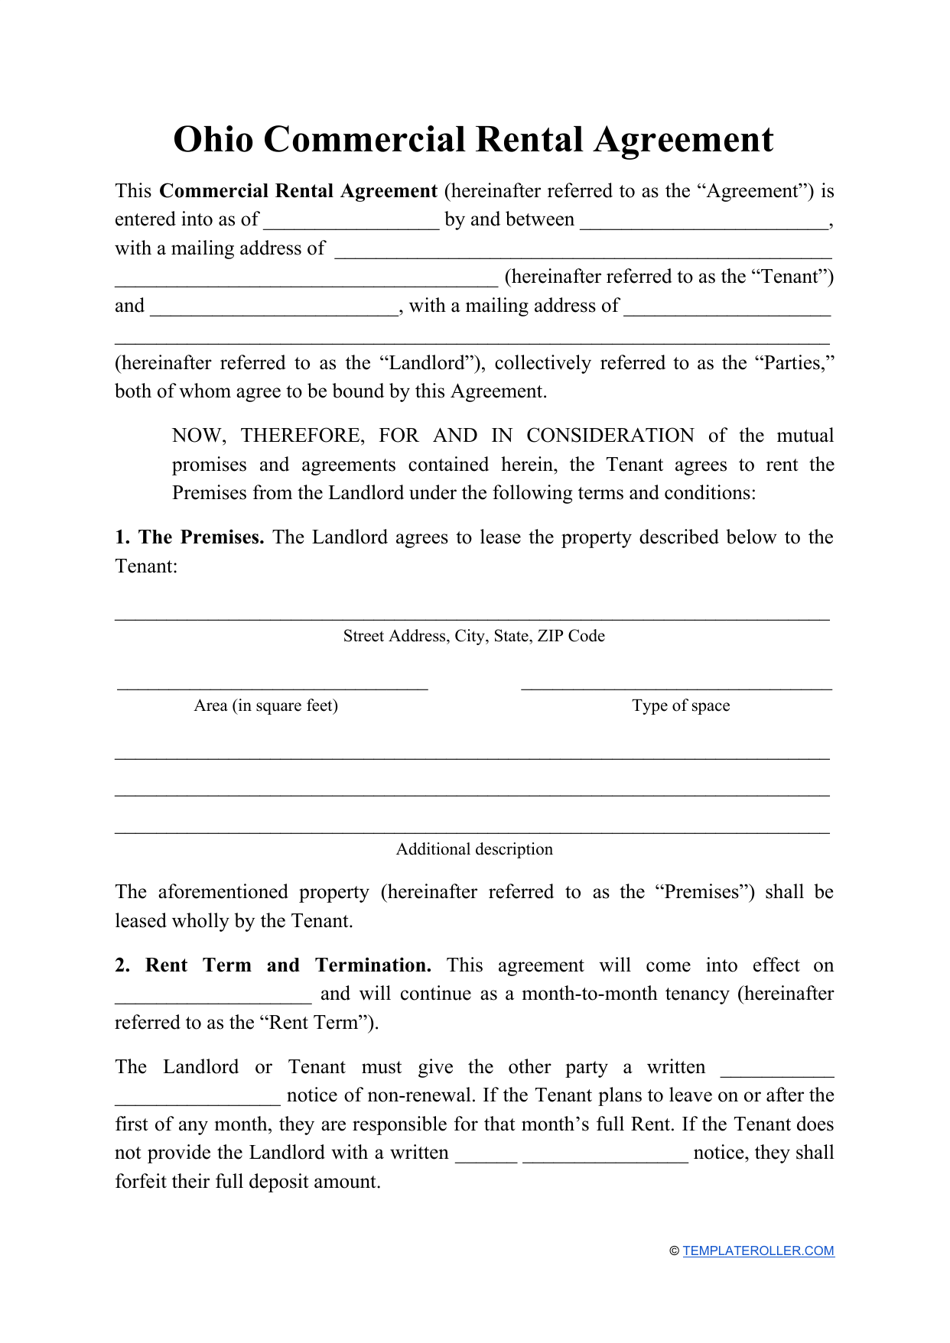 Commercial Rental Agreement Template - Ohio, Page 1